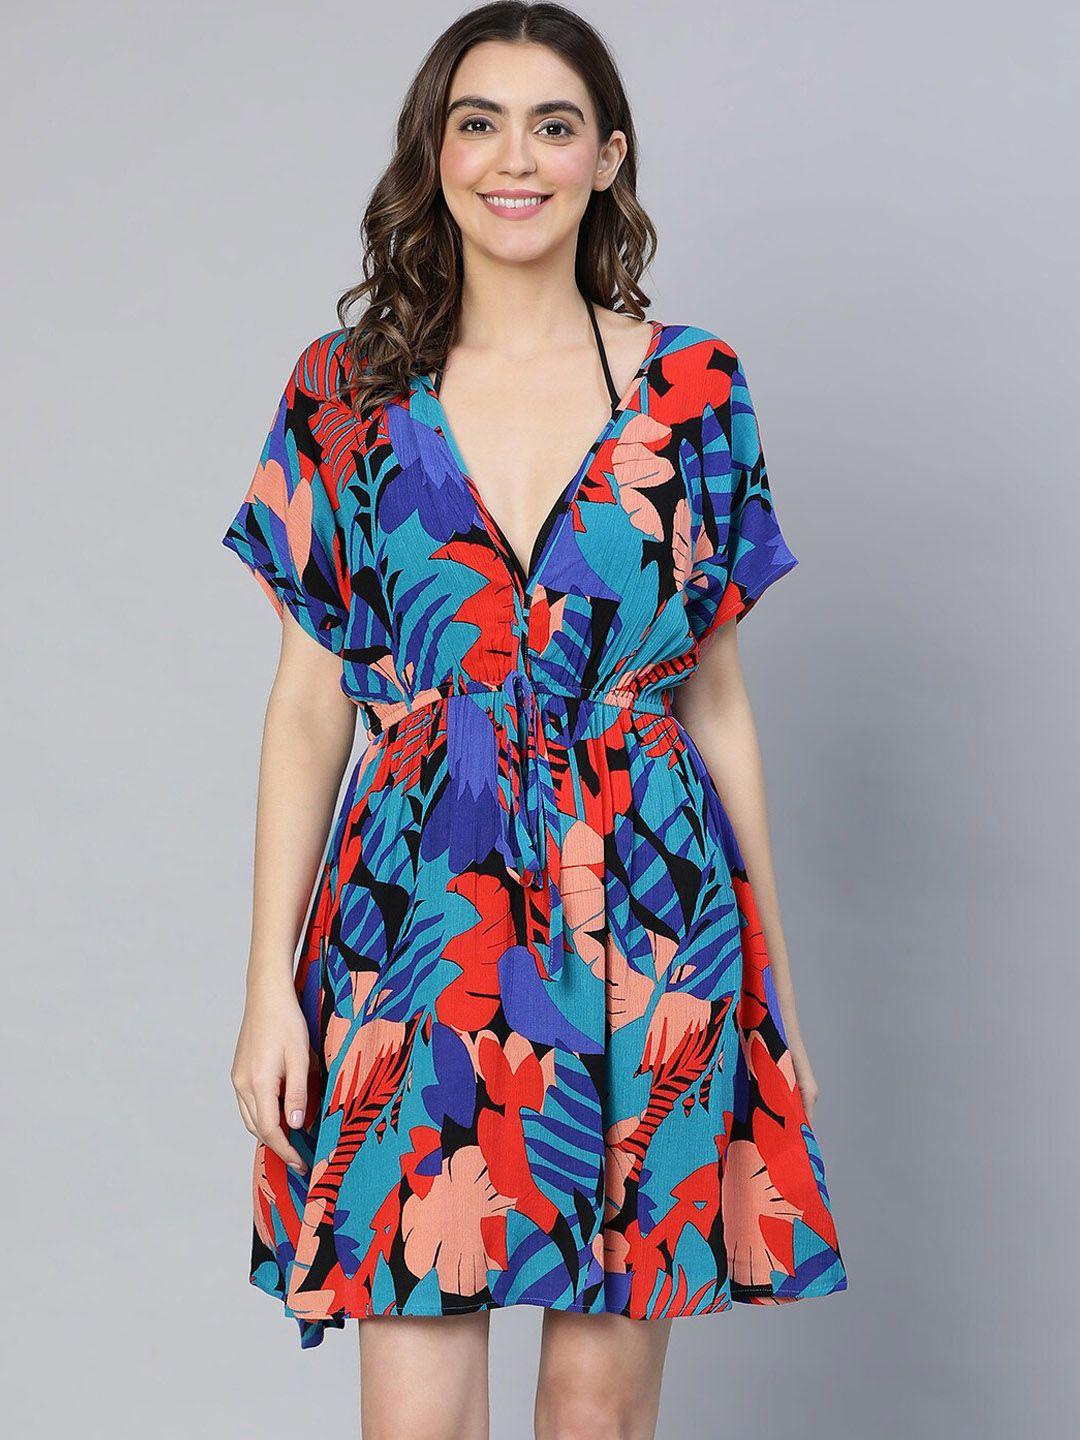 oxolloxo tropical printed swimwear cover-up dress